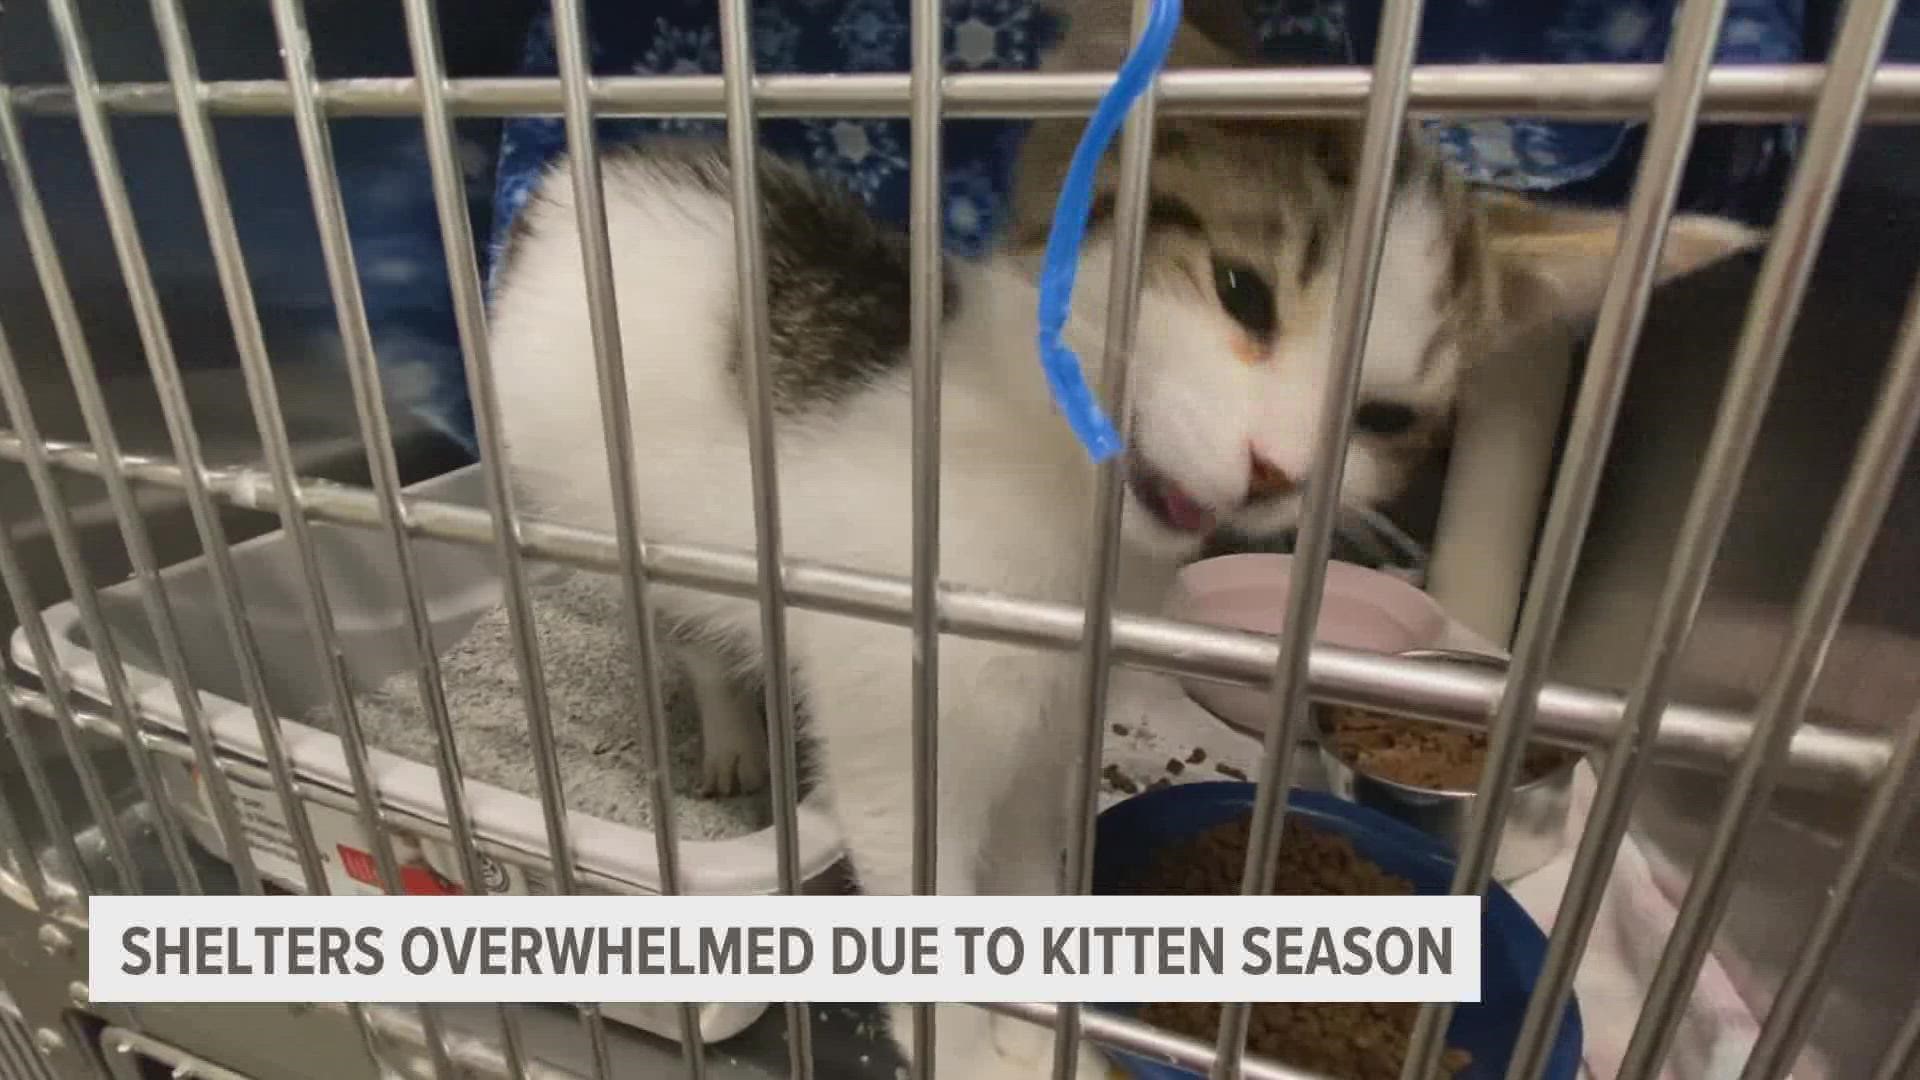 During warmer months, shelters see an influx of litters of kittens.